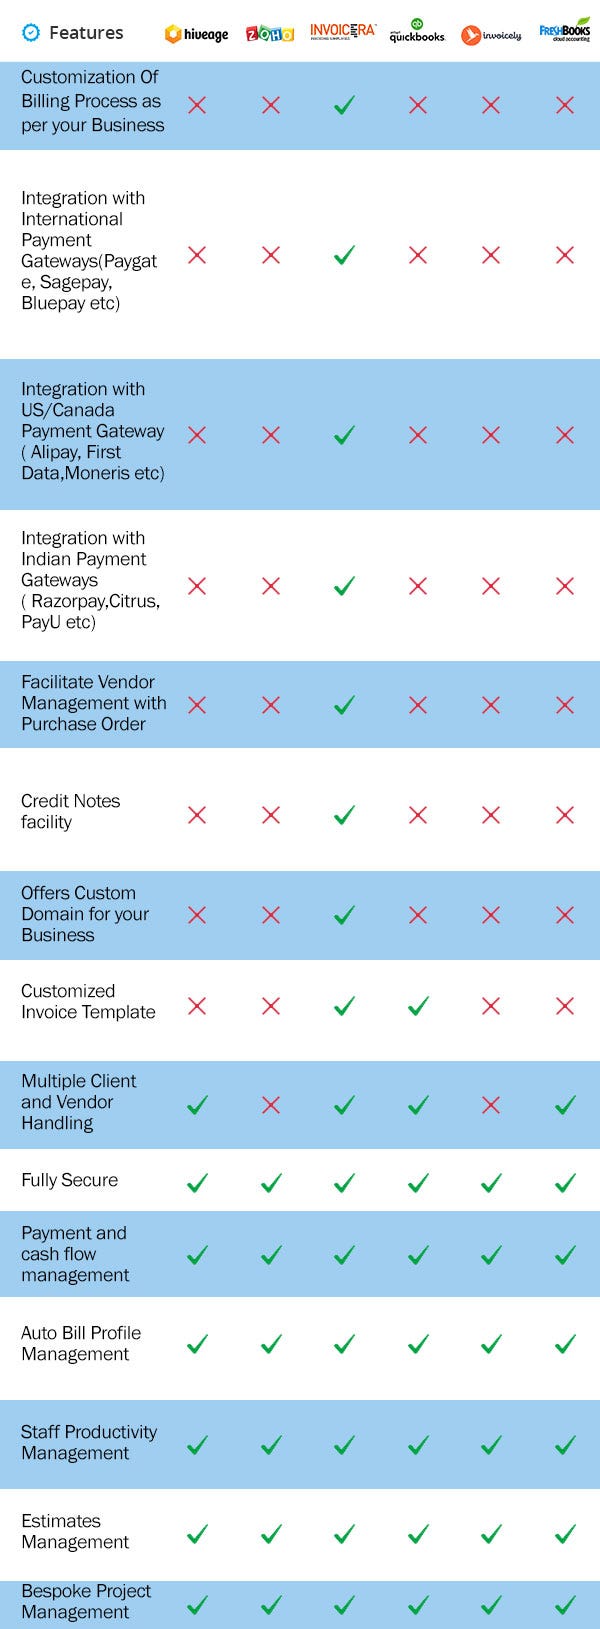 You can choose the Best Invoice Software based on the features described in this Infograph.